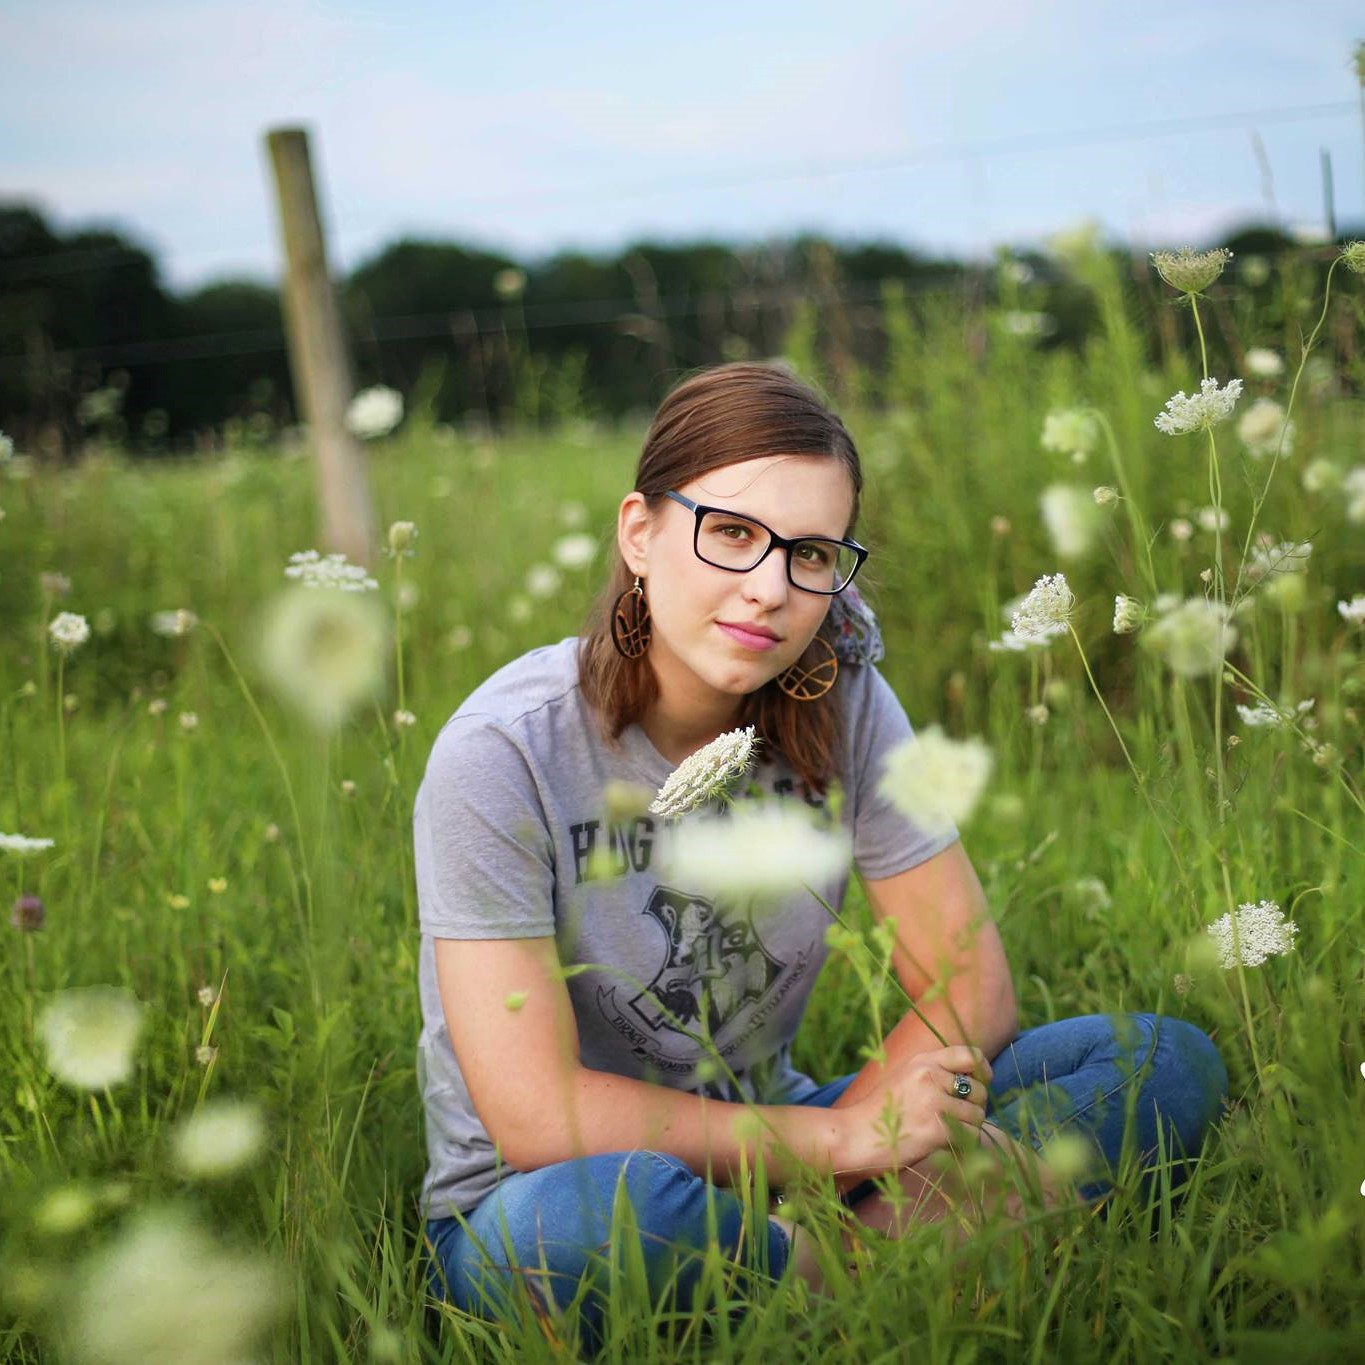 Rachel Swym sits in tall grass and flowers. She is wearing glasses and a gray tshirt.